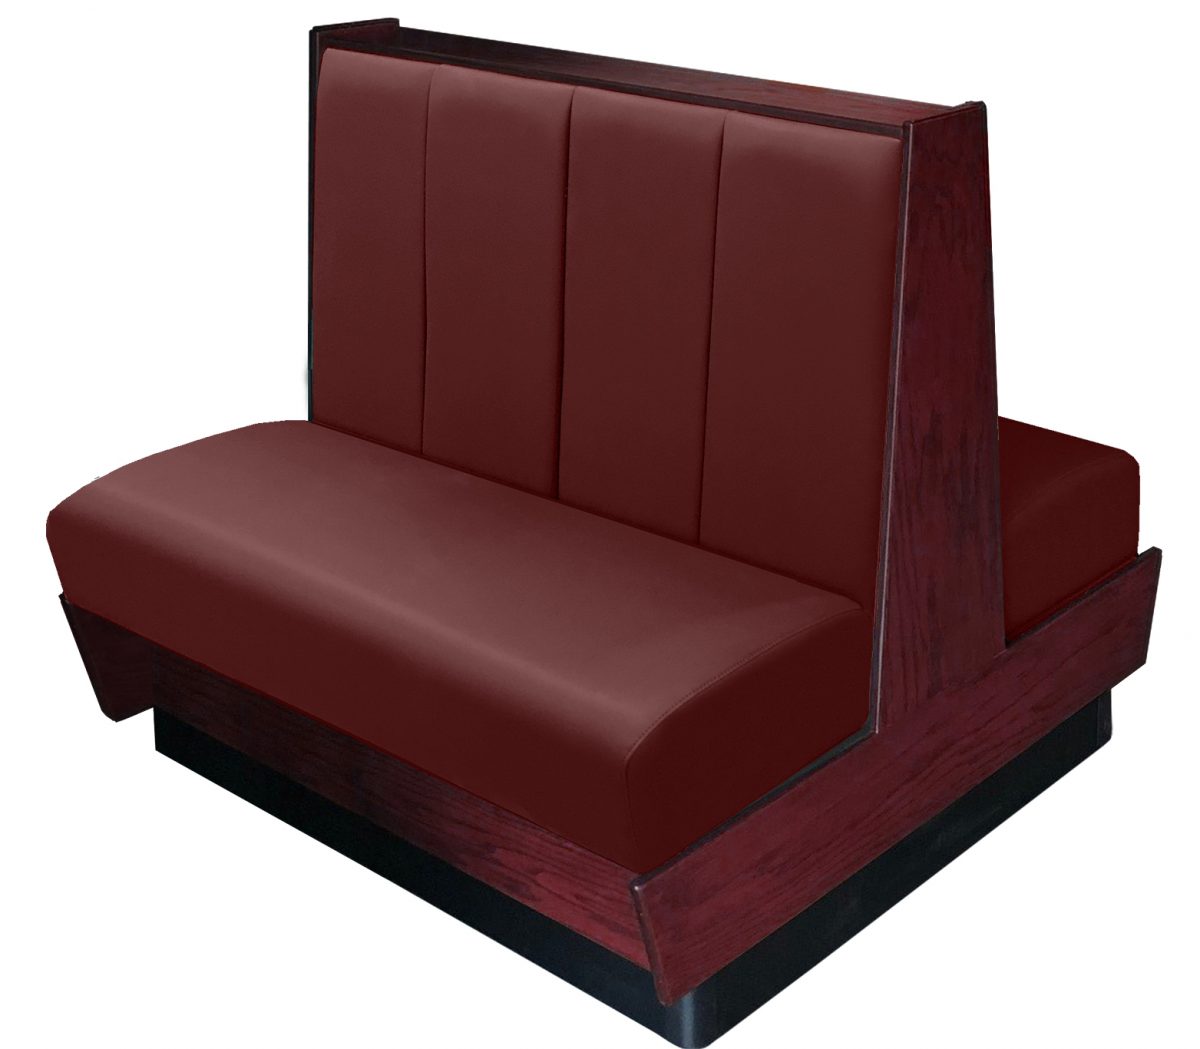 Kirkwood vinyl/upholstered wood booth stained in mahogany. Wine vinyl.